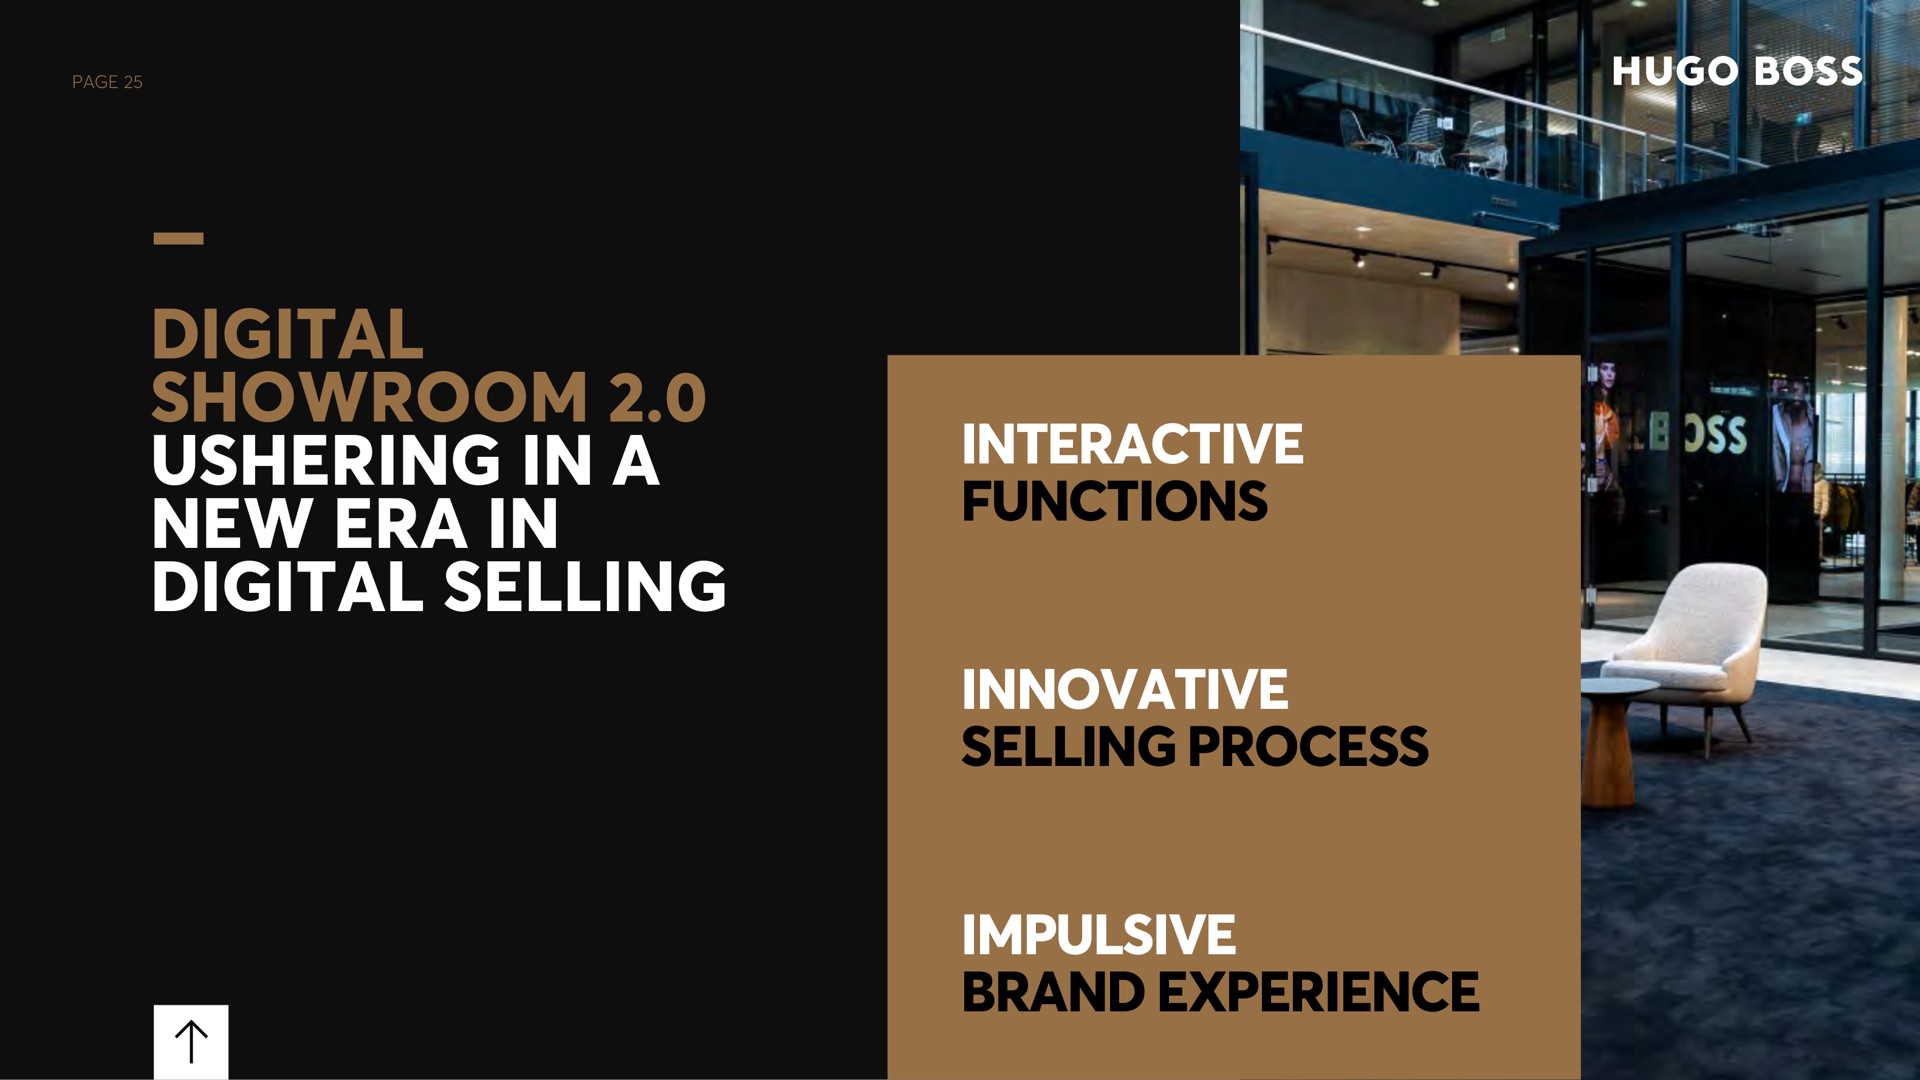 page i digital showroom ushering in a new era in digital selling interactive functions innovative selling process impulsive brand experience | Hugo Boss